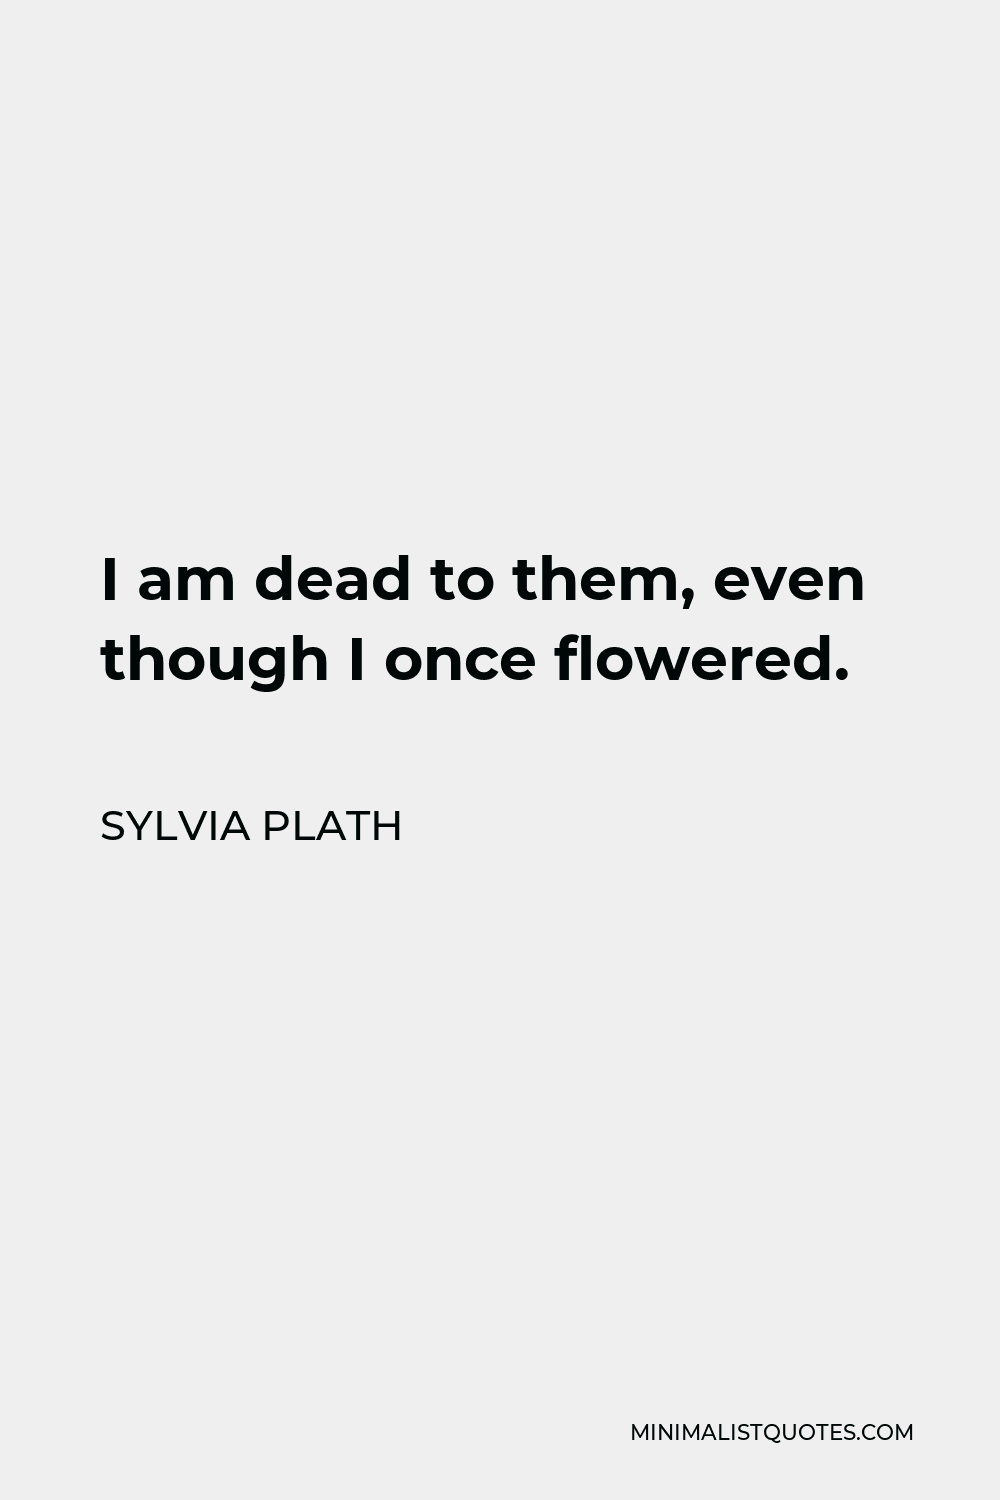 Sylvia Plath Quote: I am dead to them, even though I once flowered.